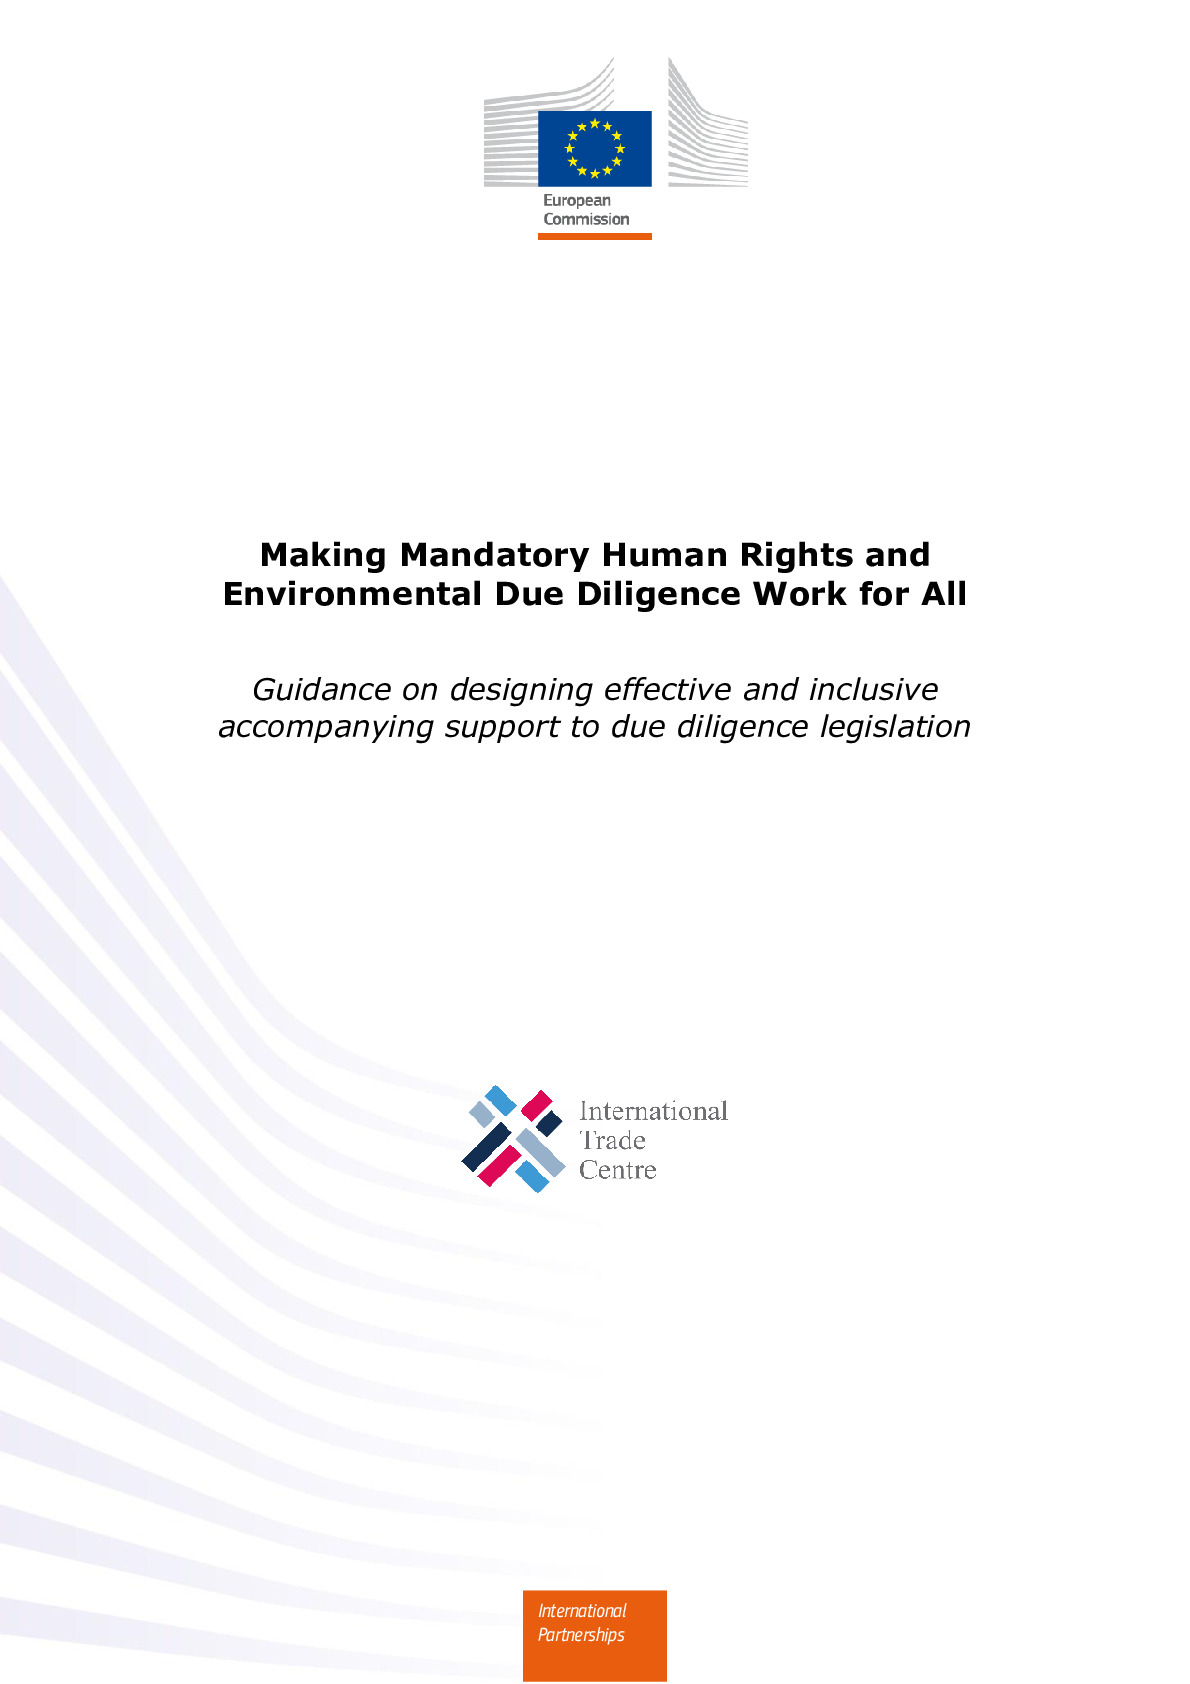 making-mandatory-human-rights-and-environmental-due-diligence-work-for-all_en